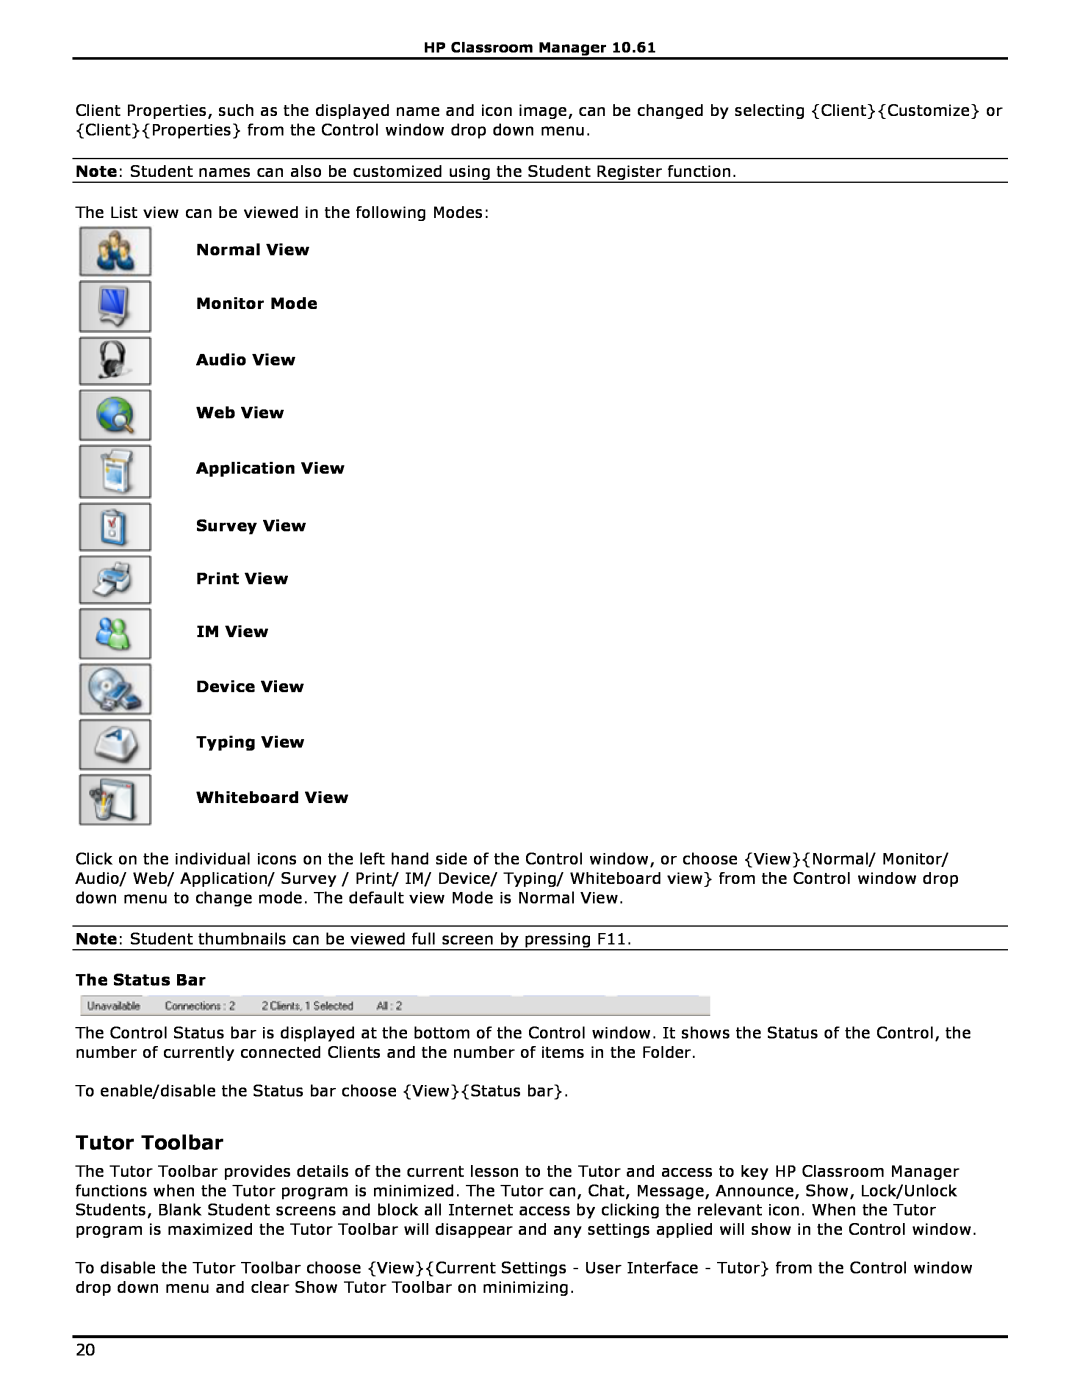 HP Classroom Manager manual Tutor Toolbar, Normal View Monitor Mode Audio View Web View Application View, Whiteboard View 